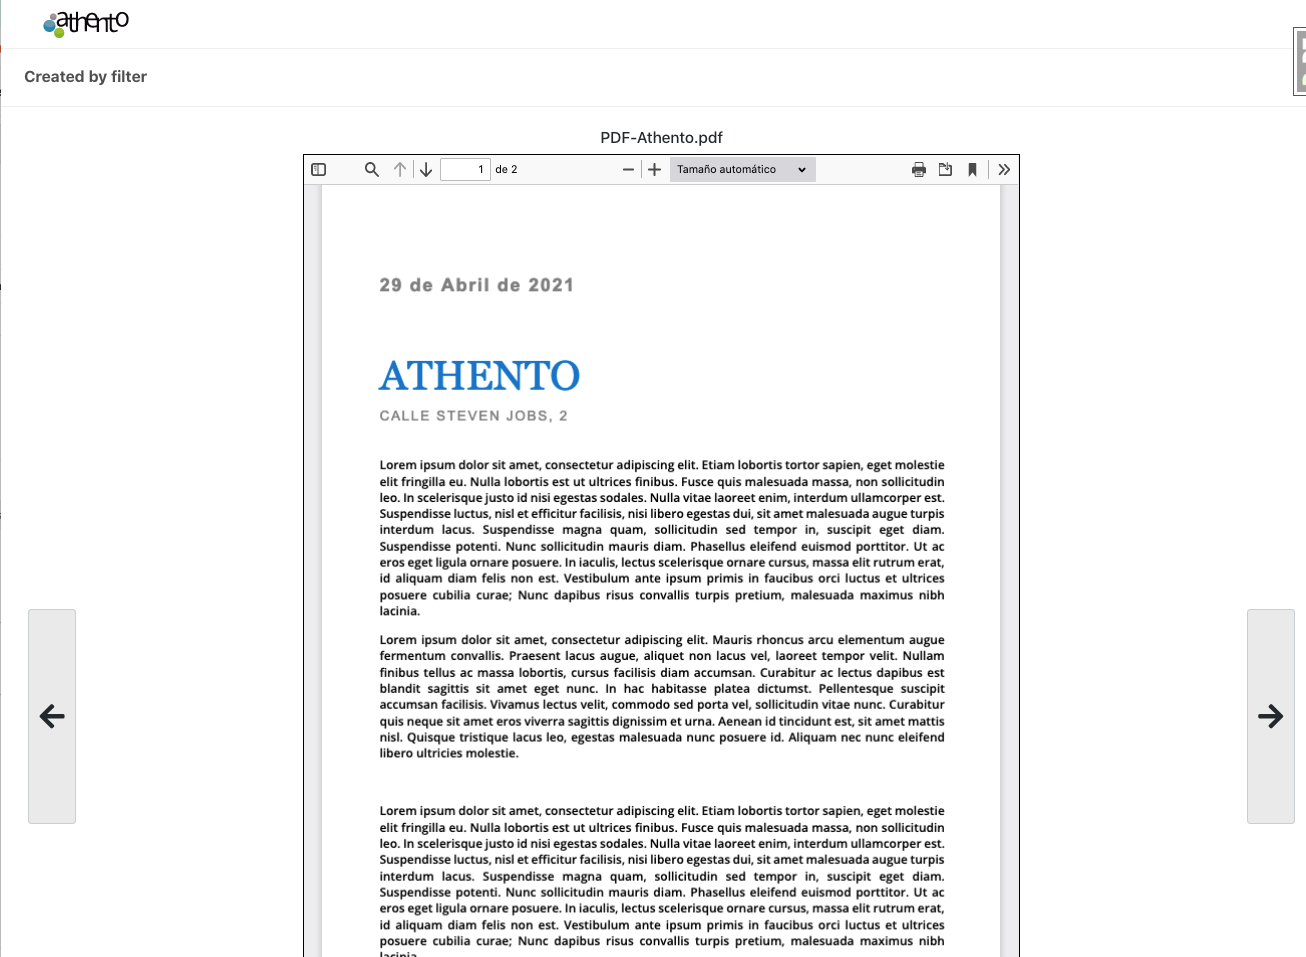 Athento_Created_by_filter_y_Postman.png